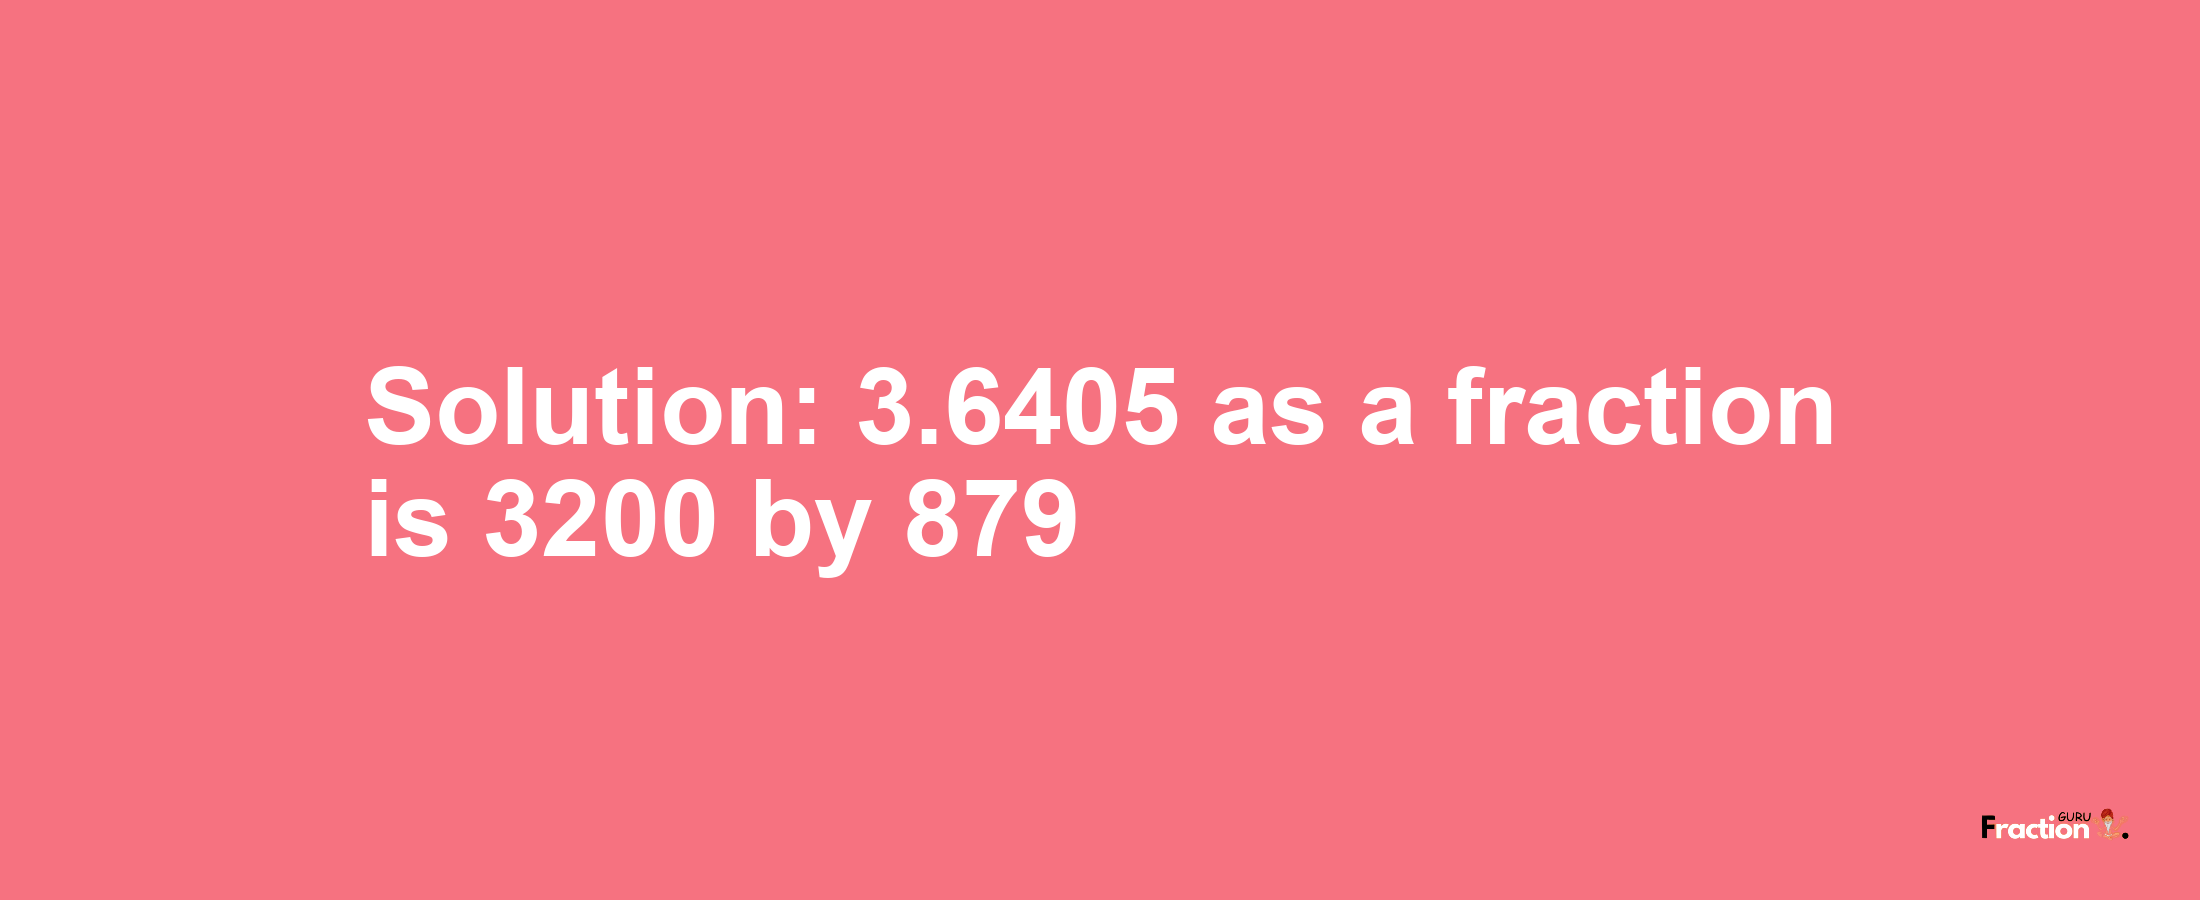 Solution:3.6405 as a fraction is 3200/879